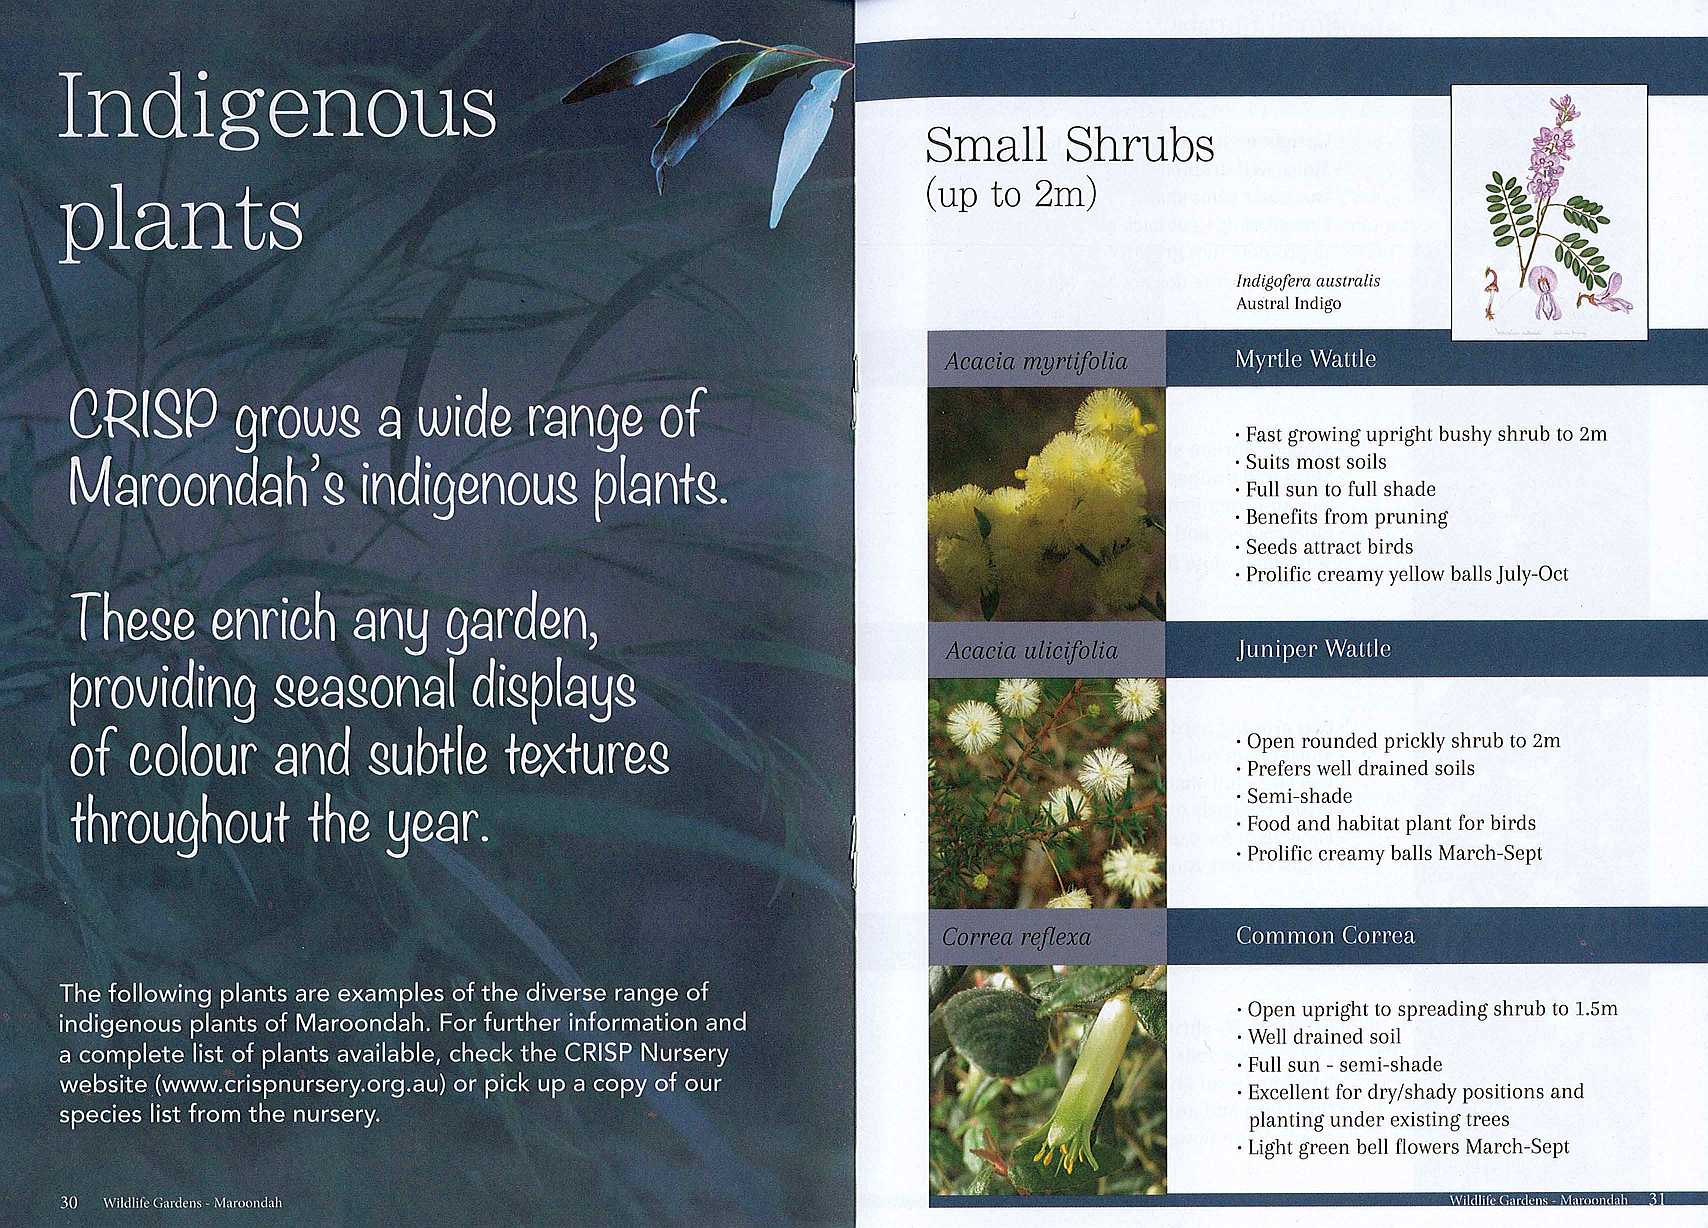 Sample page of Wildlife Gardens Booklet